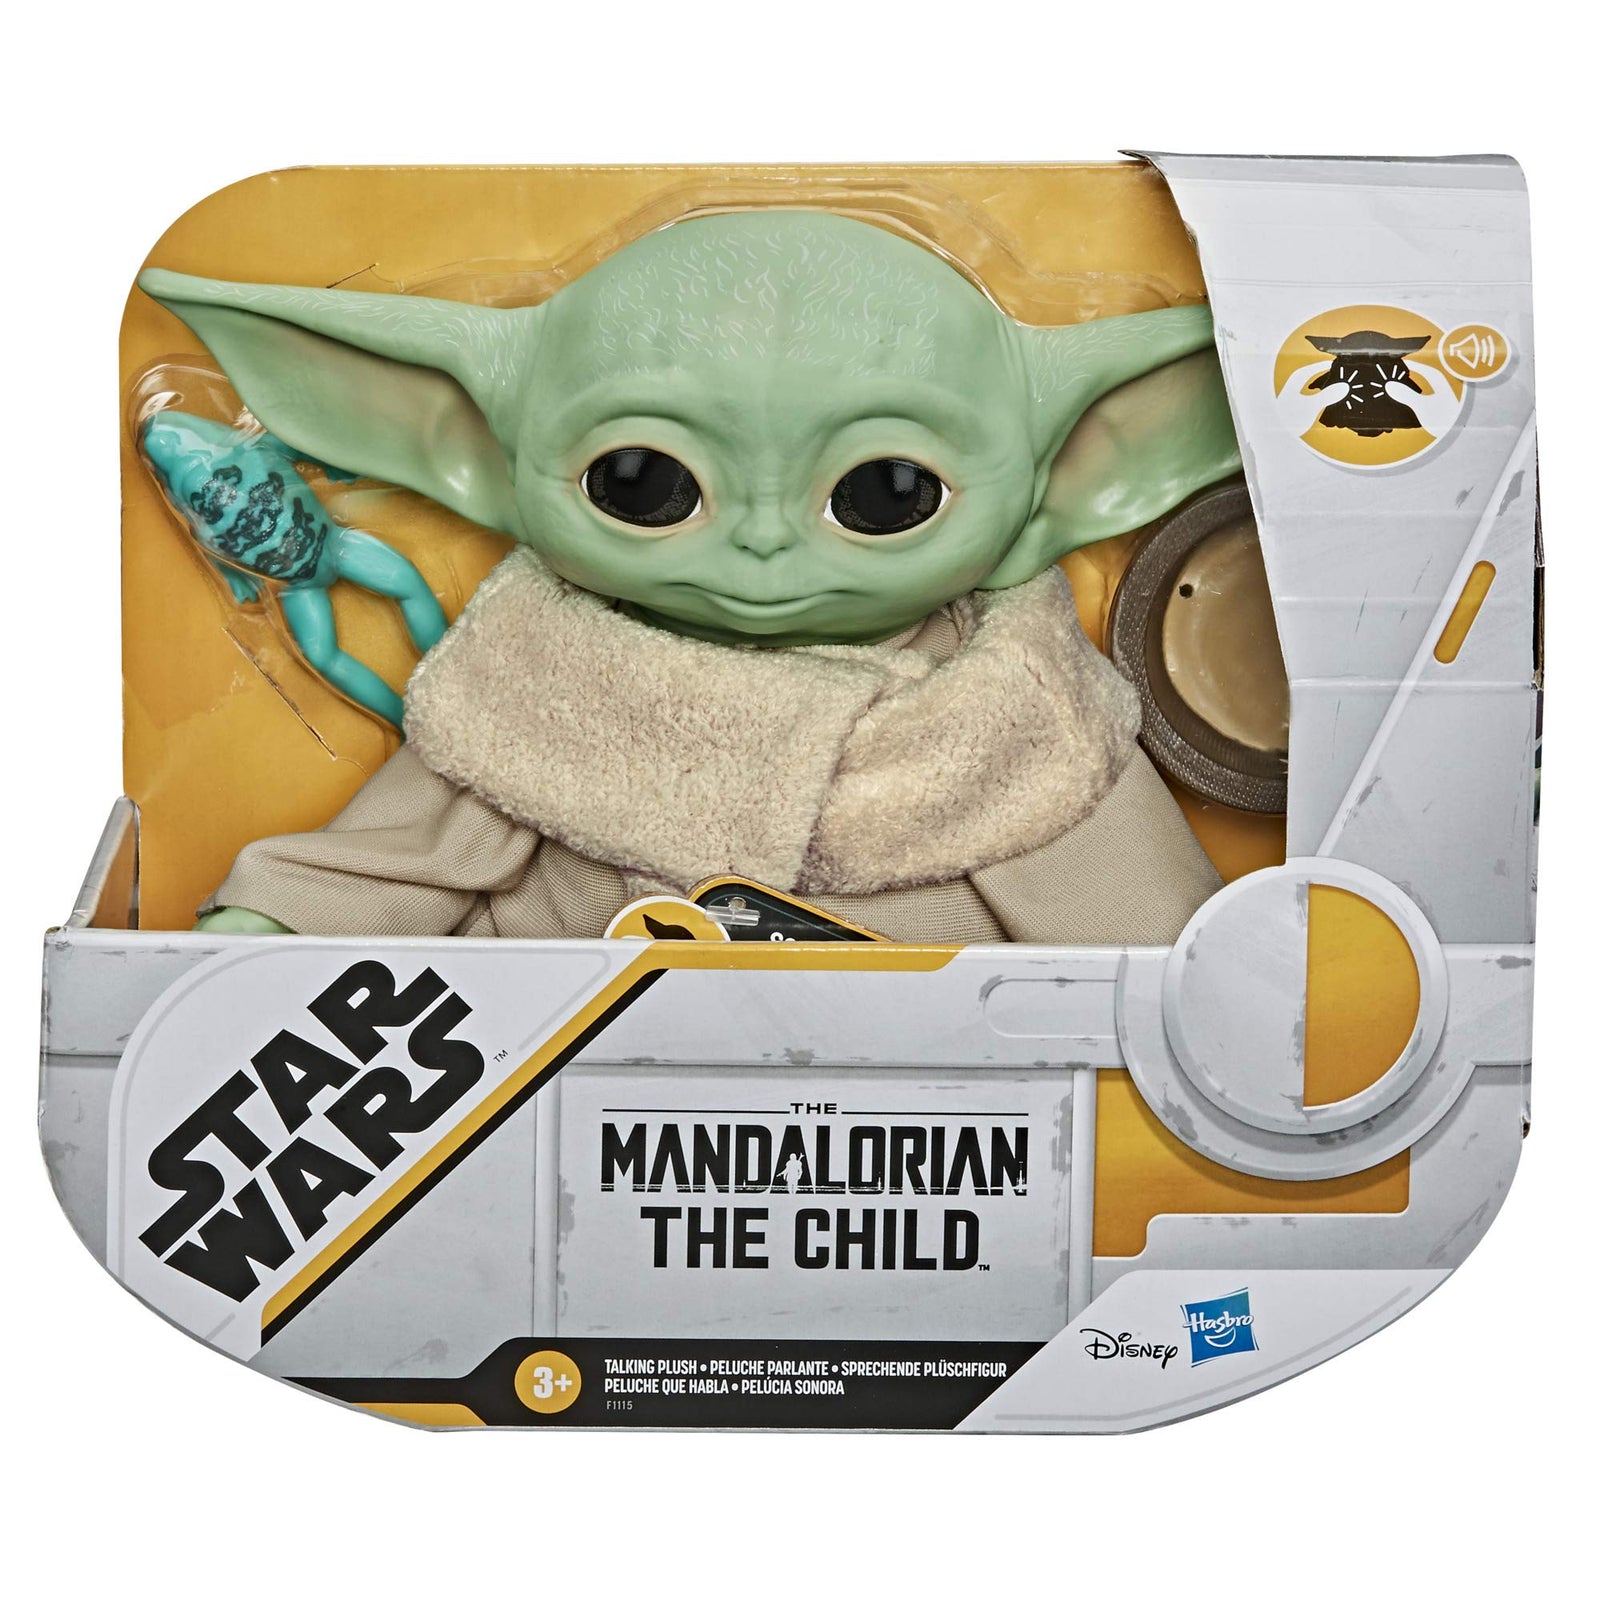 Star Wars The Child Talking Plush Toy with Character Sounds and Accessories, The Mandalorian Toy for Kids Ages 3 and Up